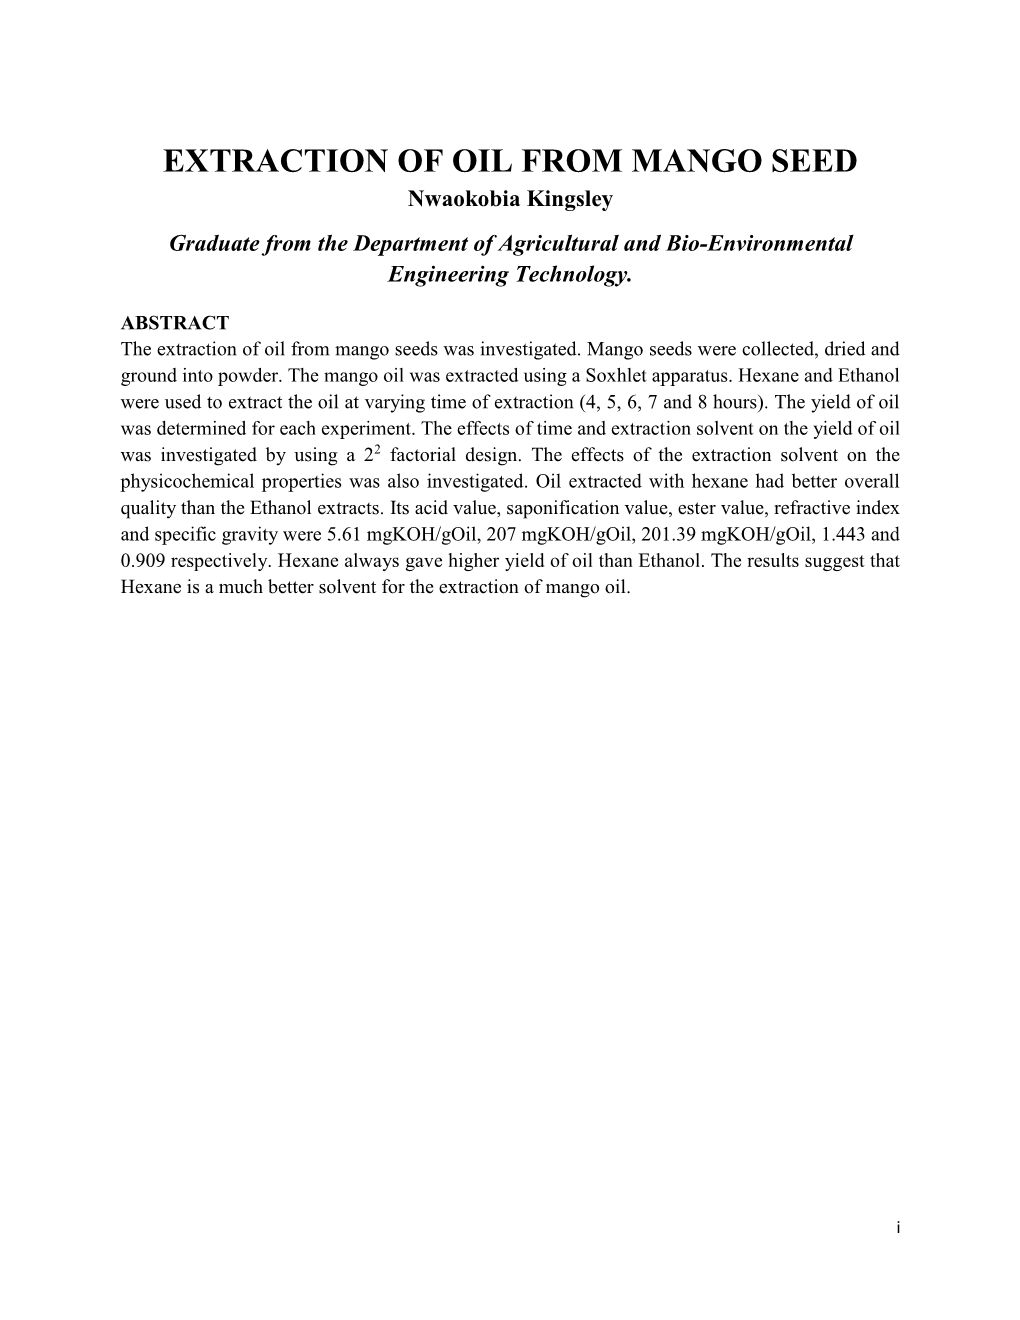 EXTRACTION of OIL from MANGO SEED Nwaokobia Kingsley Graduate from the Department of Agricultural and Bio-Environmental Engineering Technology